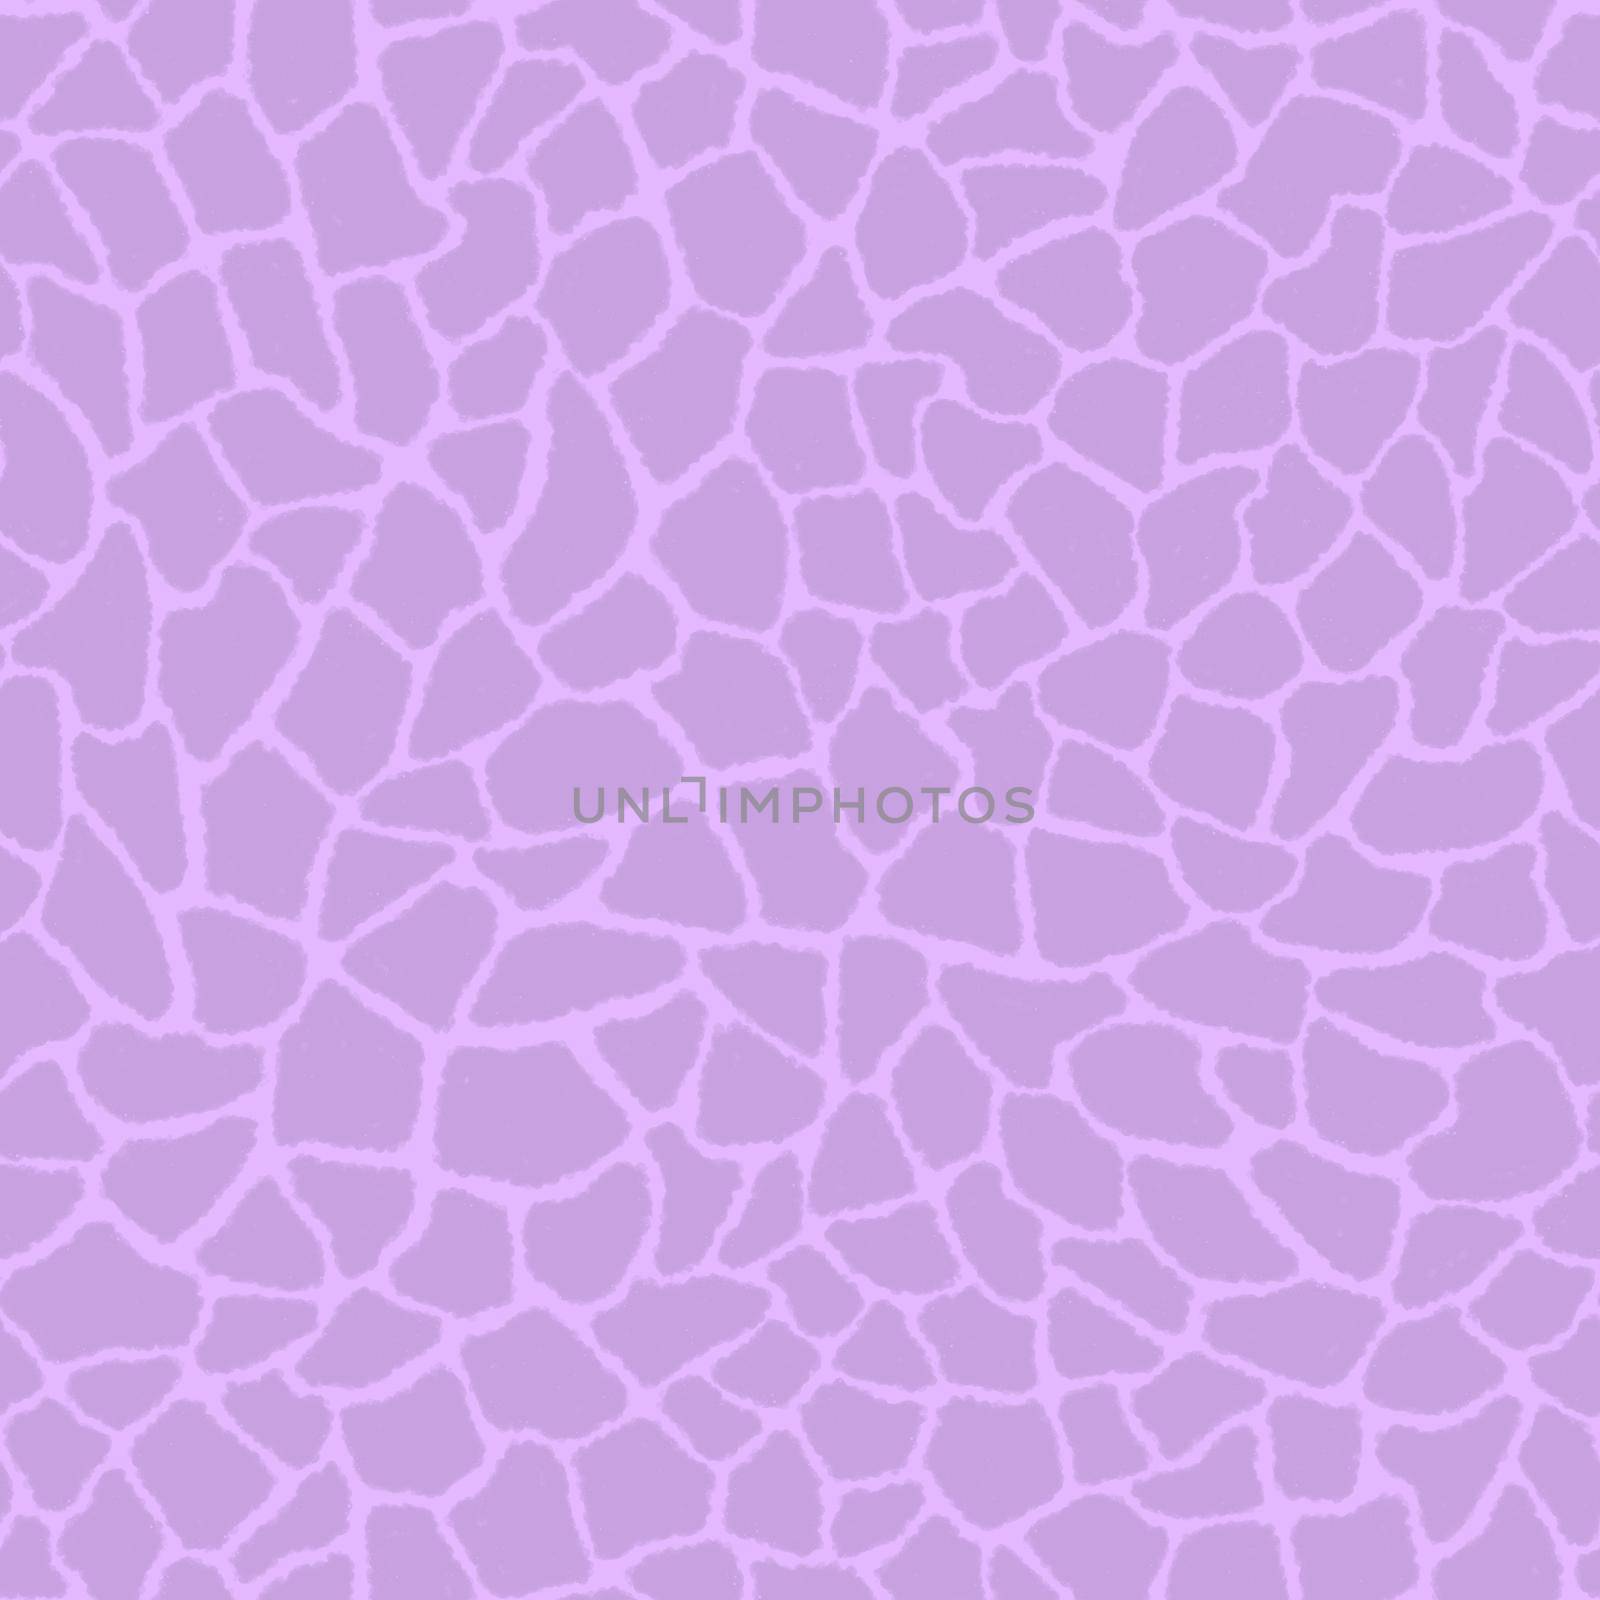 Giraffe skin color seamless pattern with fashion animal print for continuous replicate. Chaotic mosaic lilac pieces on pink background. Wrapping paper, funny textile fabric print,design,decor.